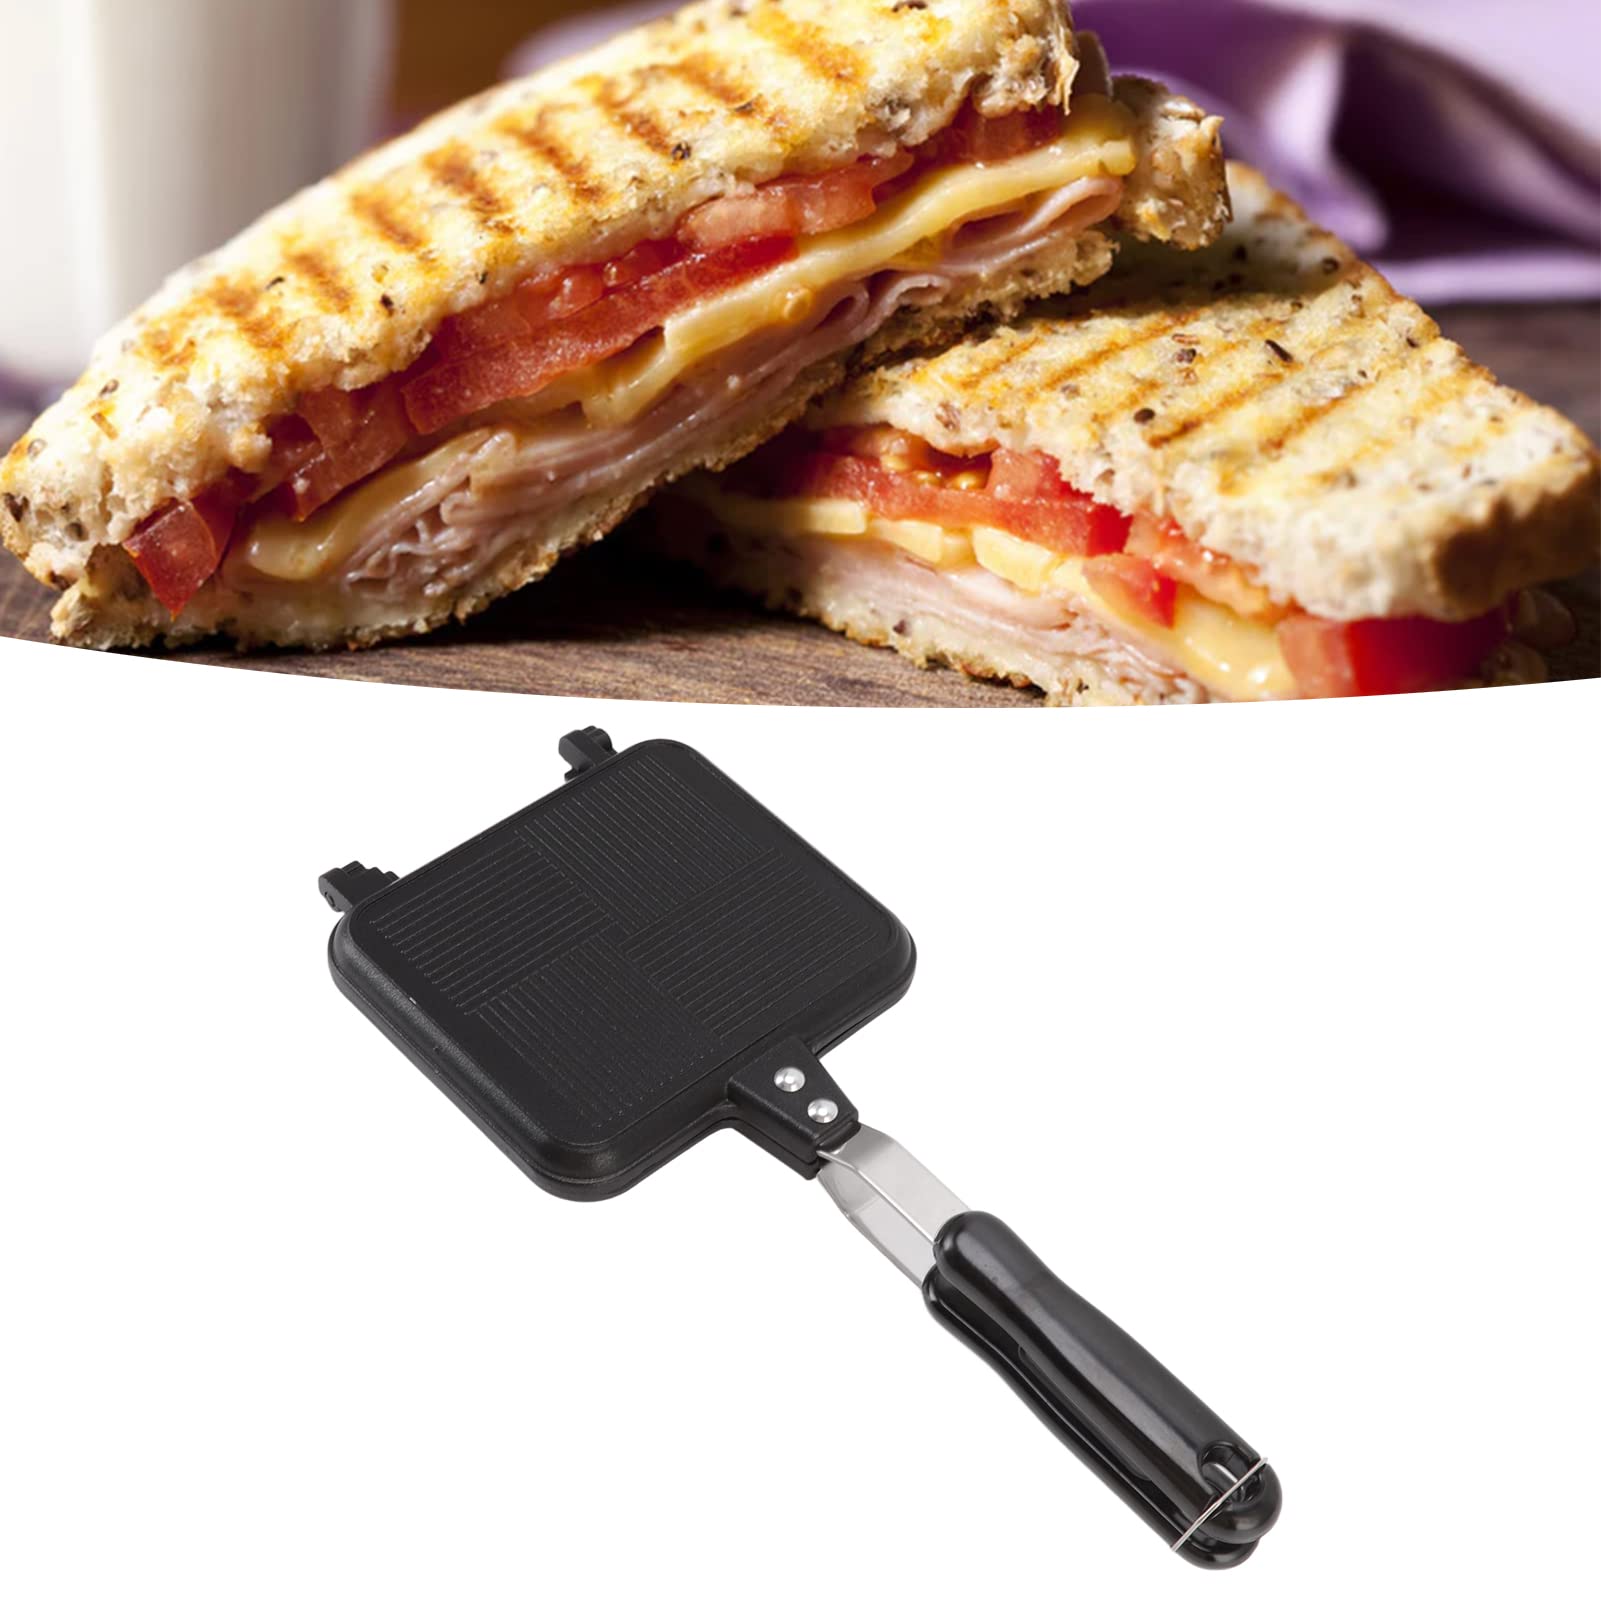 Fdit Hot Sandwich Maker,Kitchen Twill Removable Avoid Sticking Double Sided Heating Sandwich Pan Suitable for Kitchen Supplies